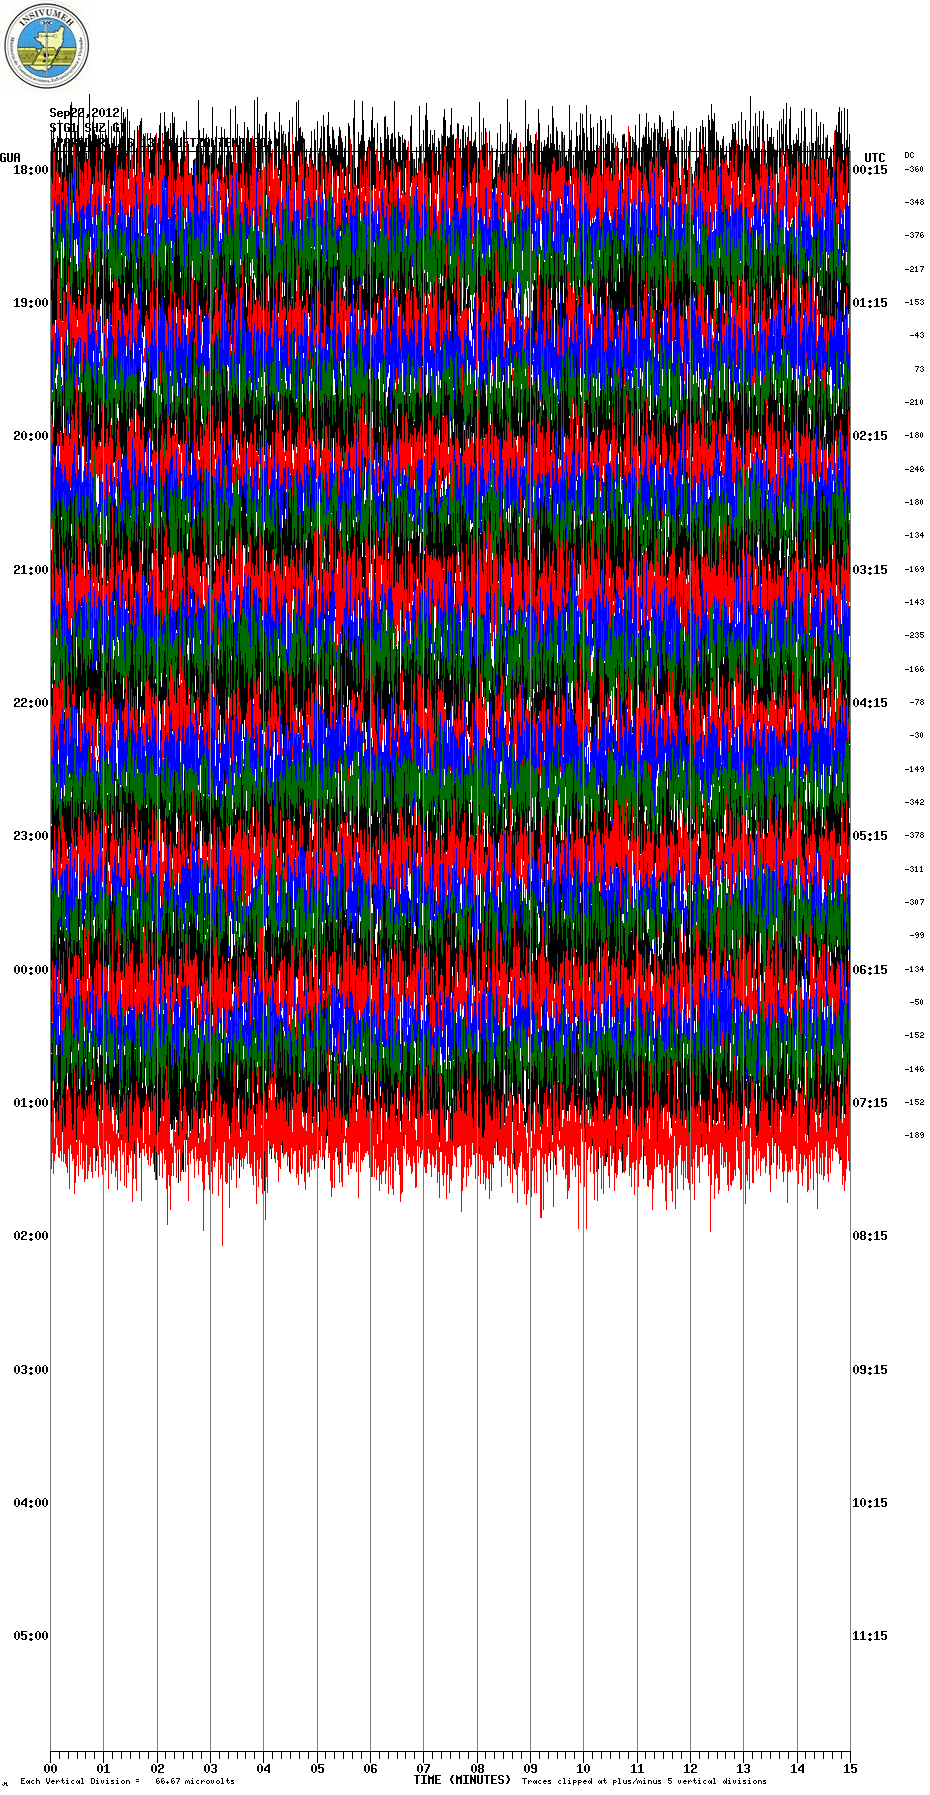 Current seismic signal from STG1 station (INSIVUMEH)